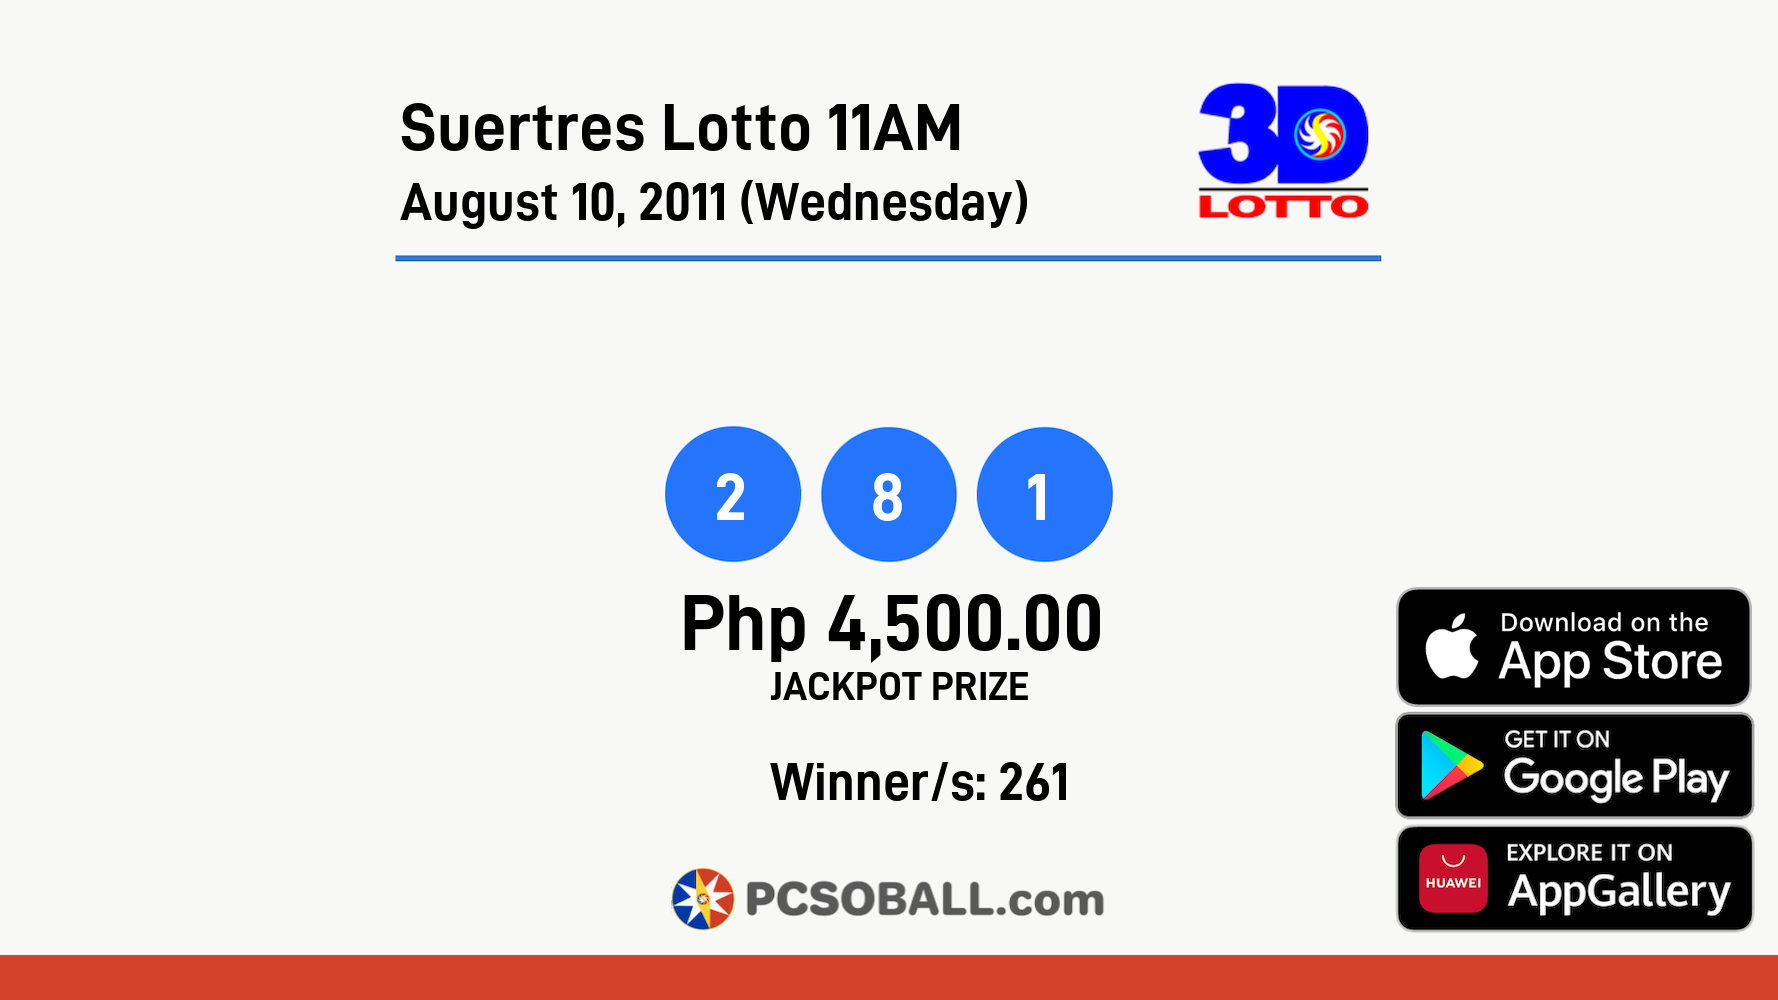 Suertres Lotto 11AM August 10, 2011 (Wednesday) Result